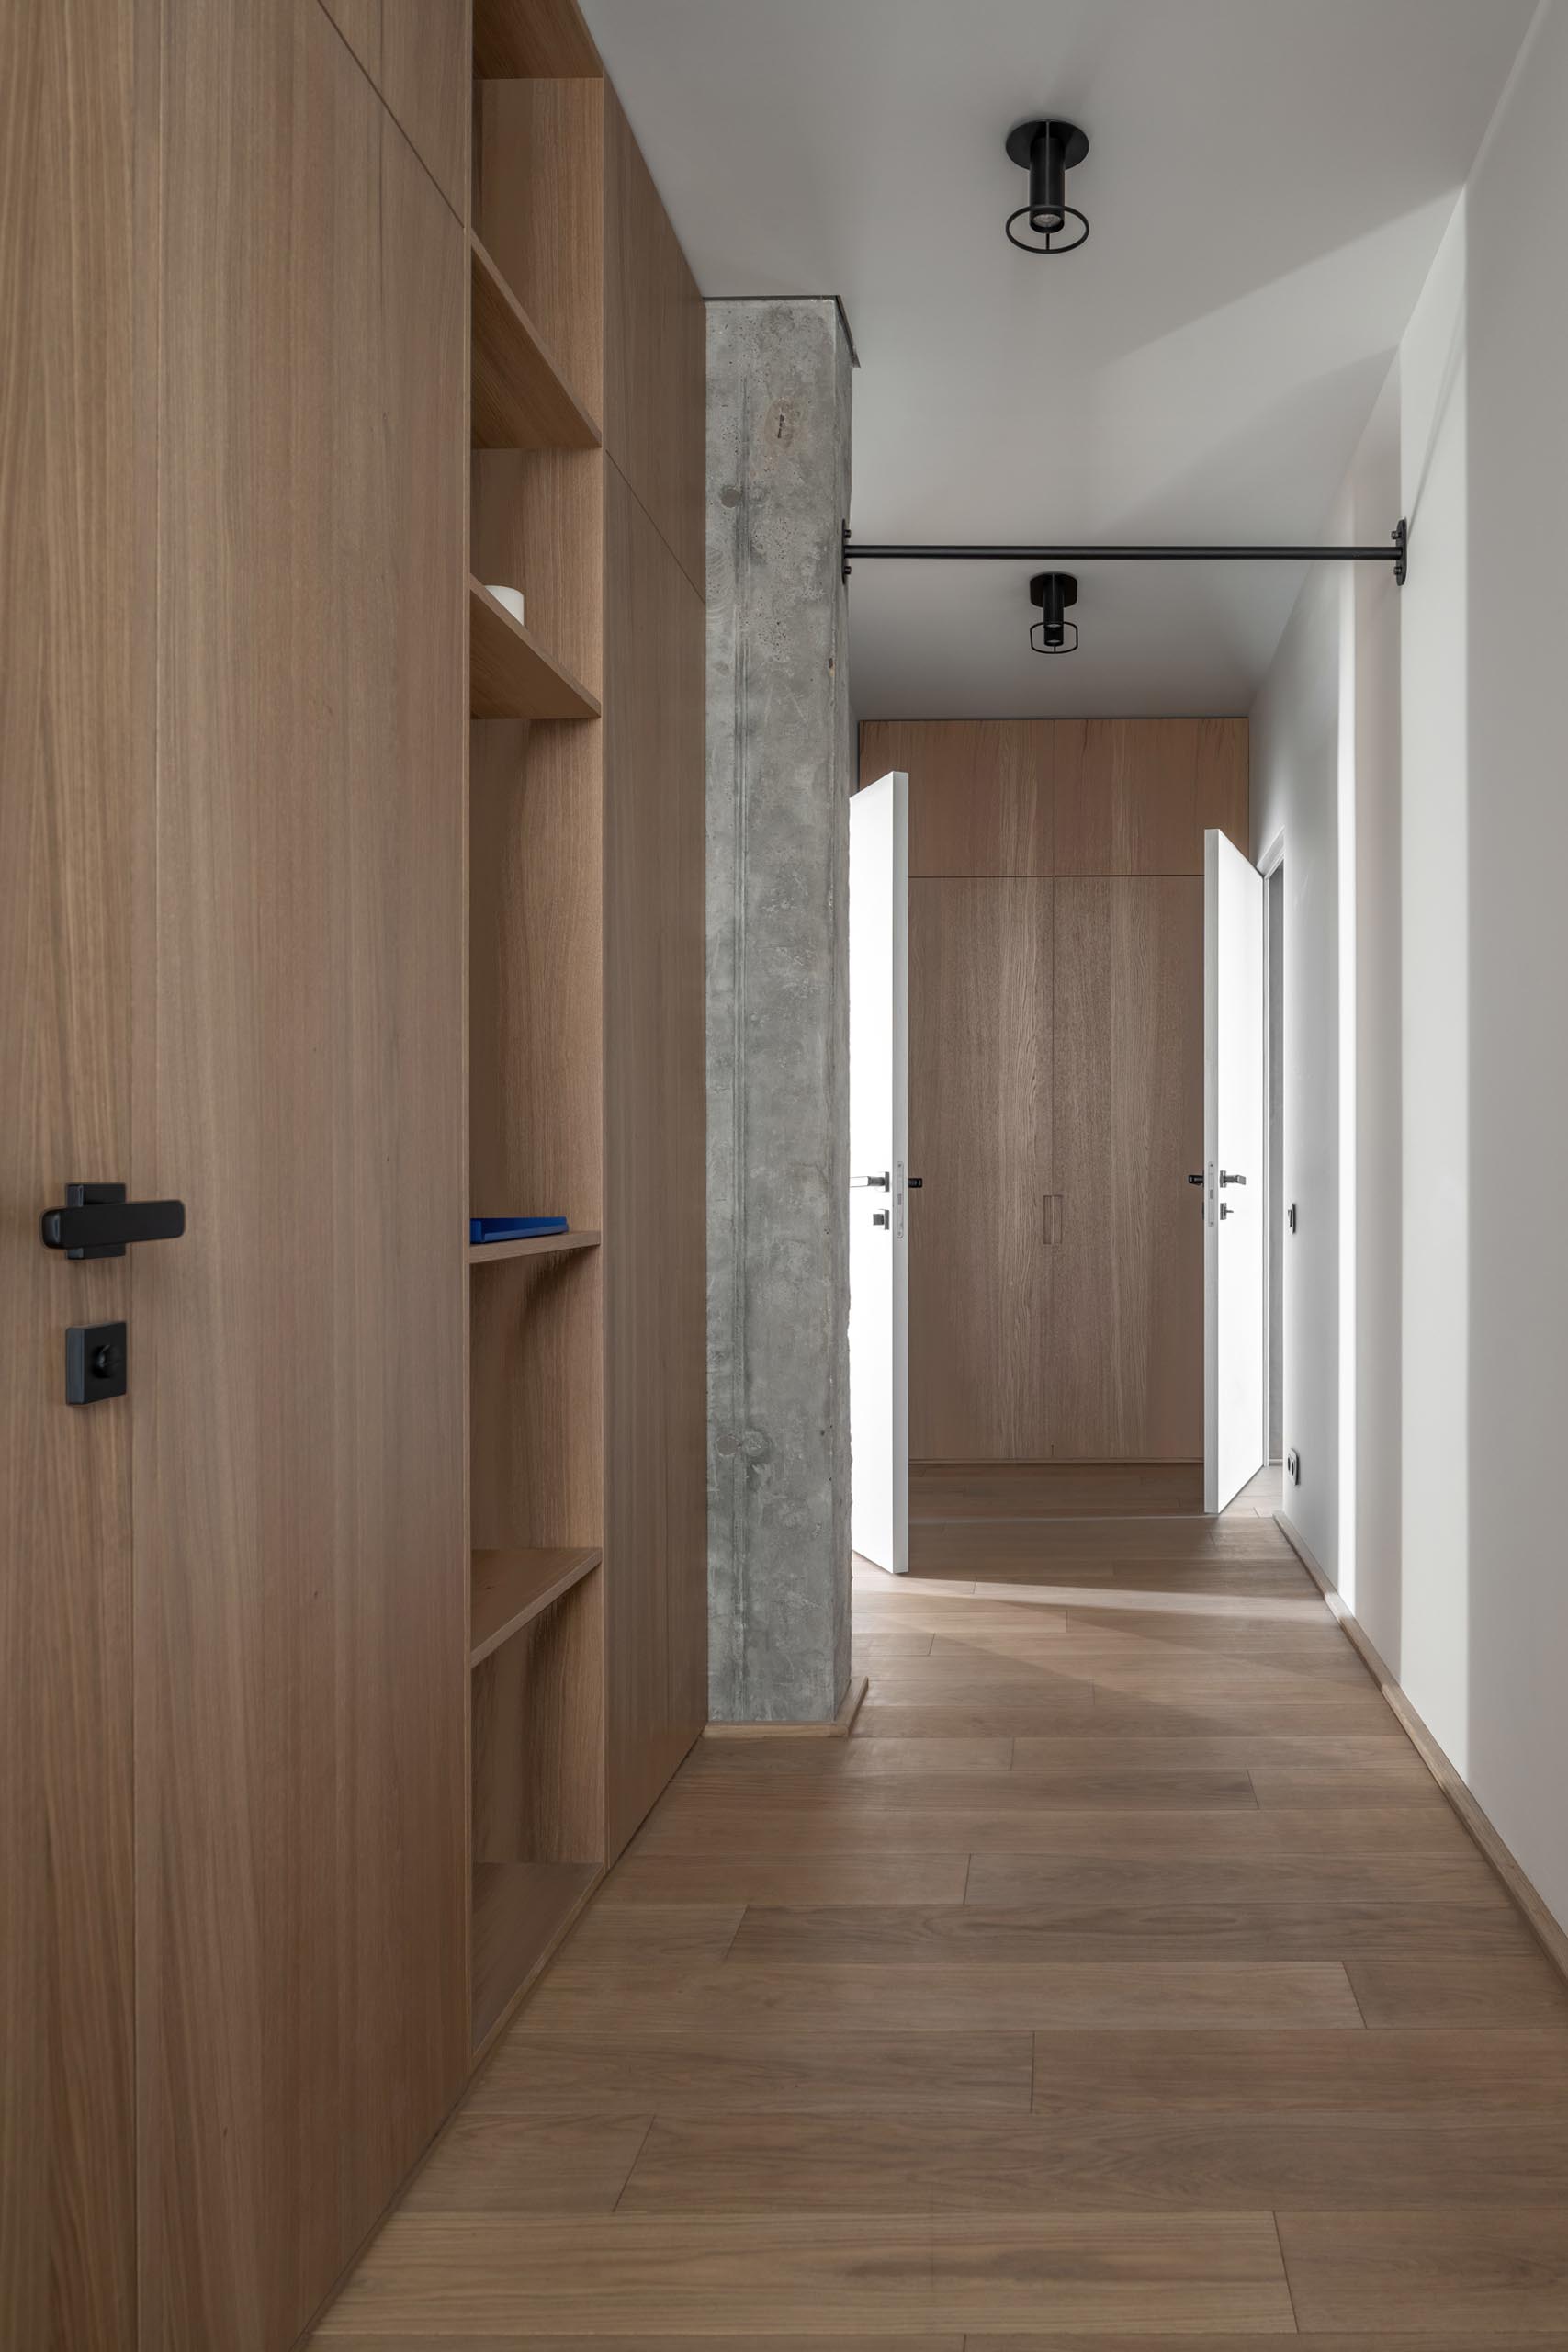 A hallway with wood cabinets provides additional storage in a modern apartment.